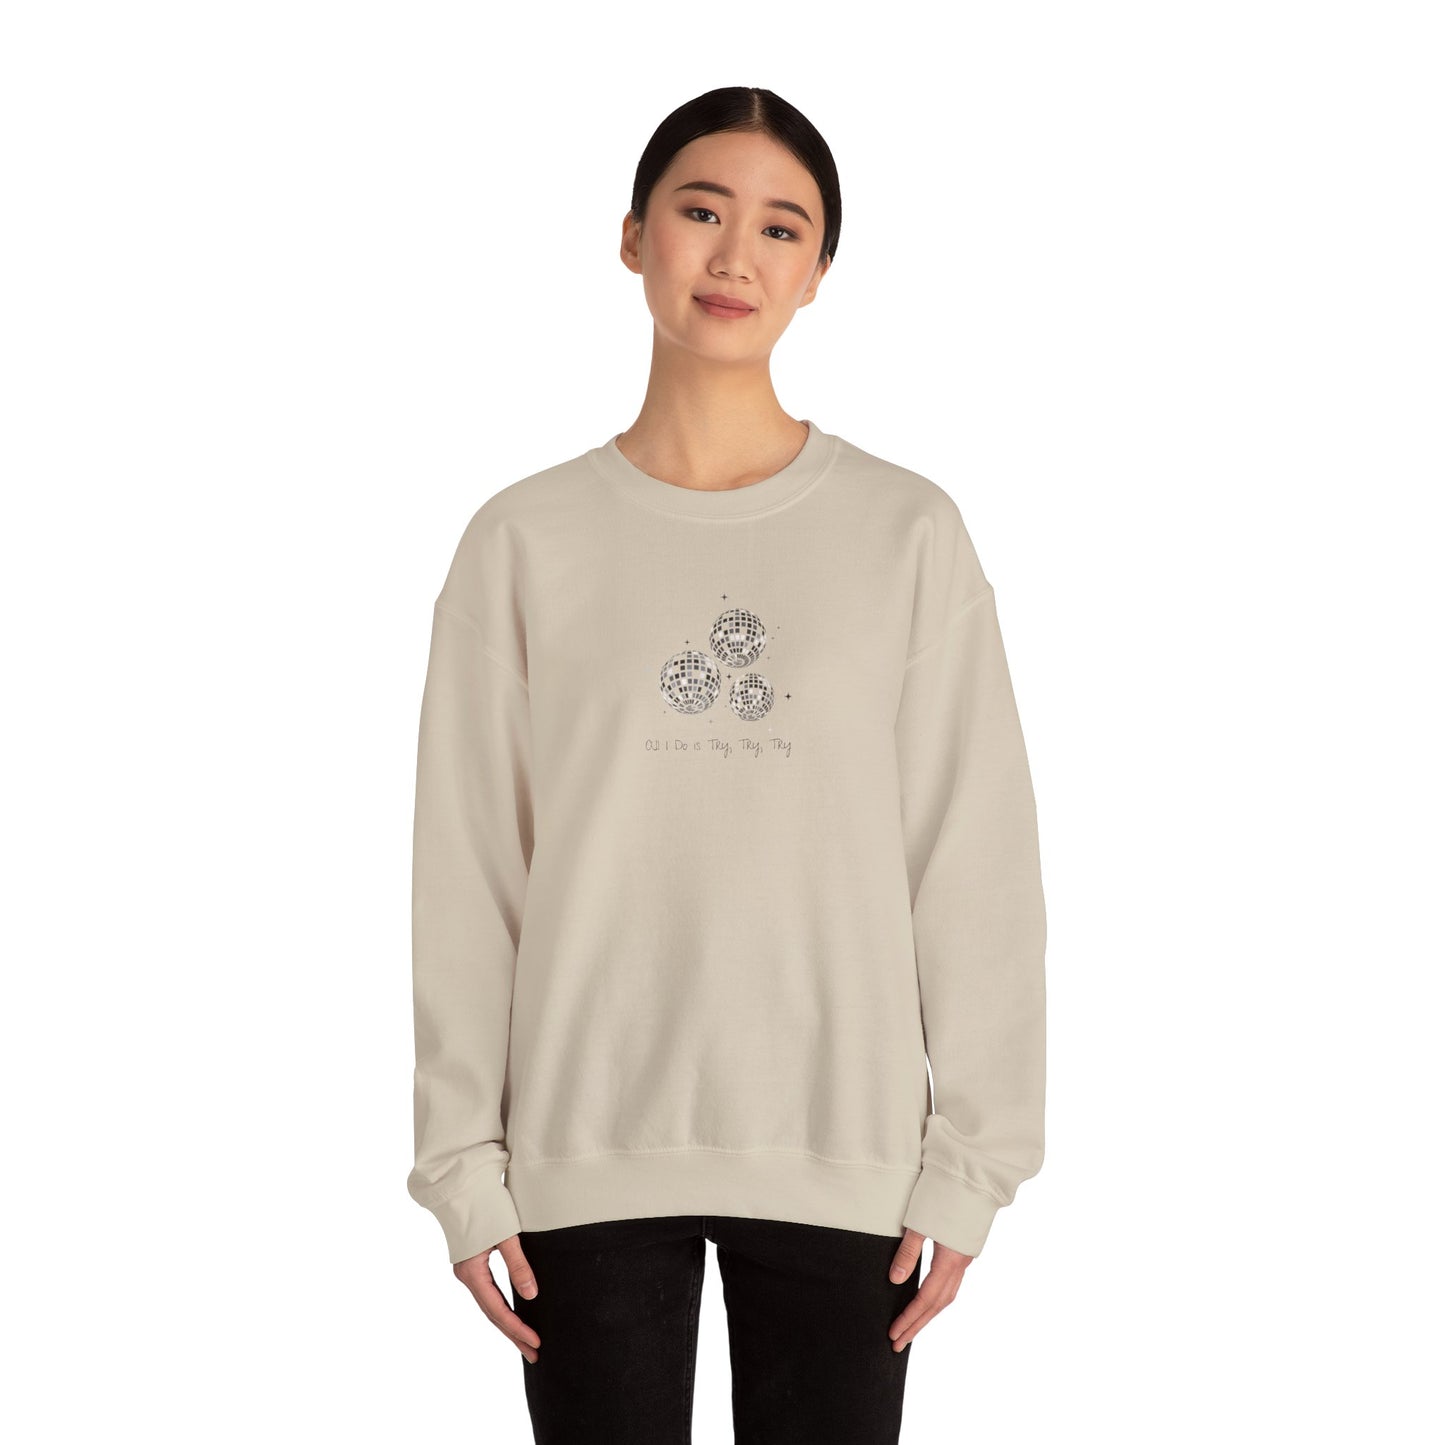 All I Do is Try, Try, Try Unisex Crewneck